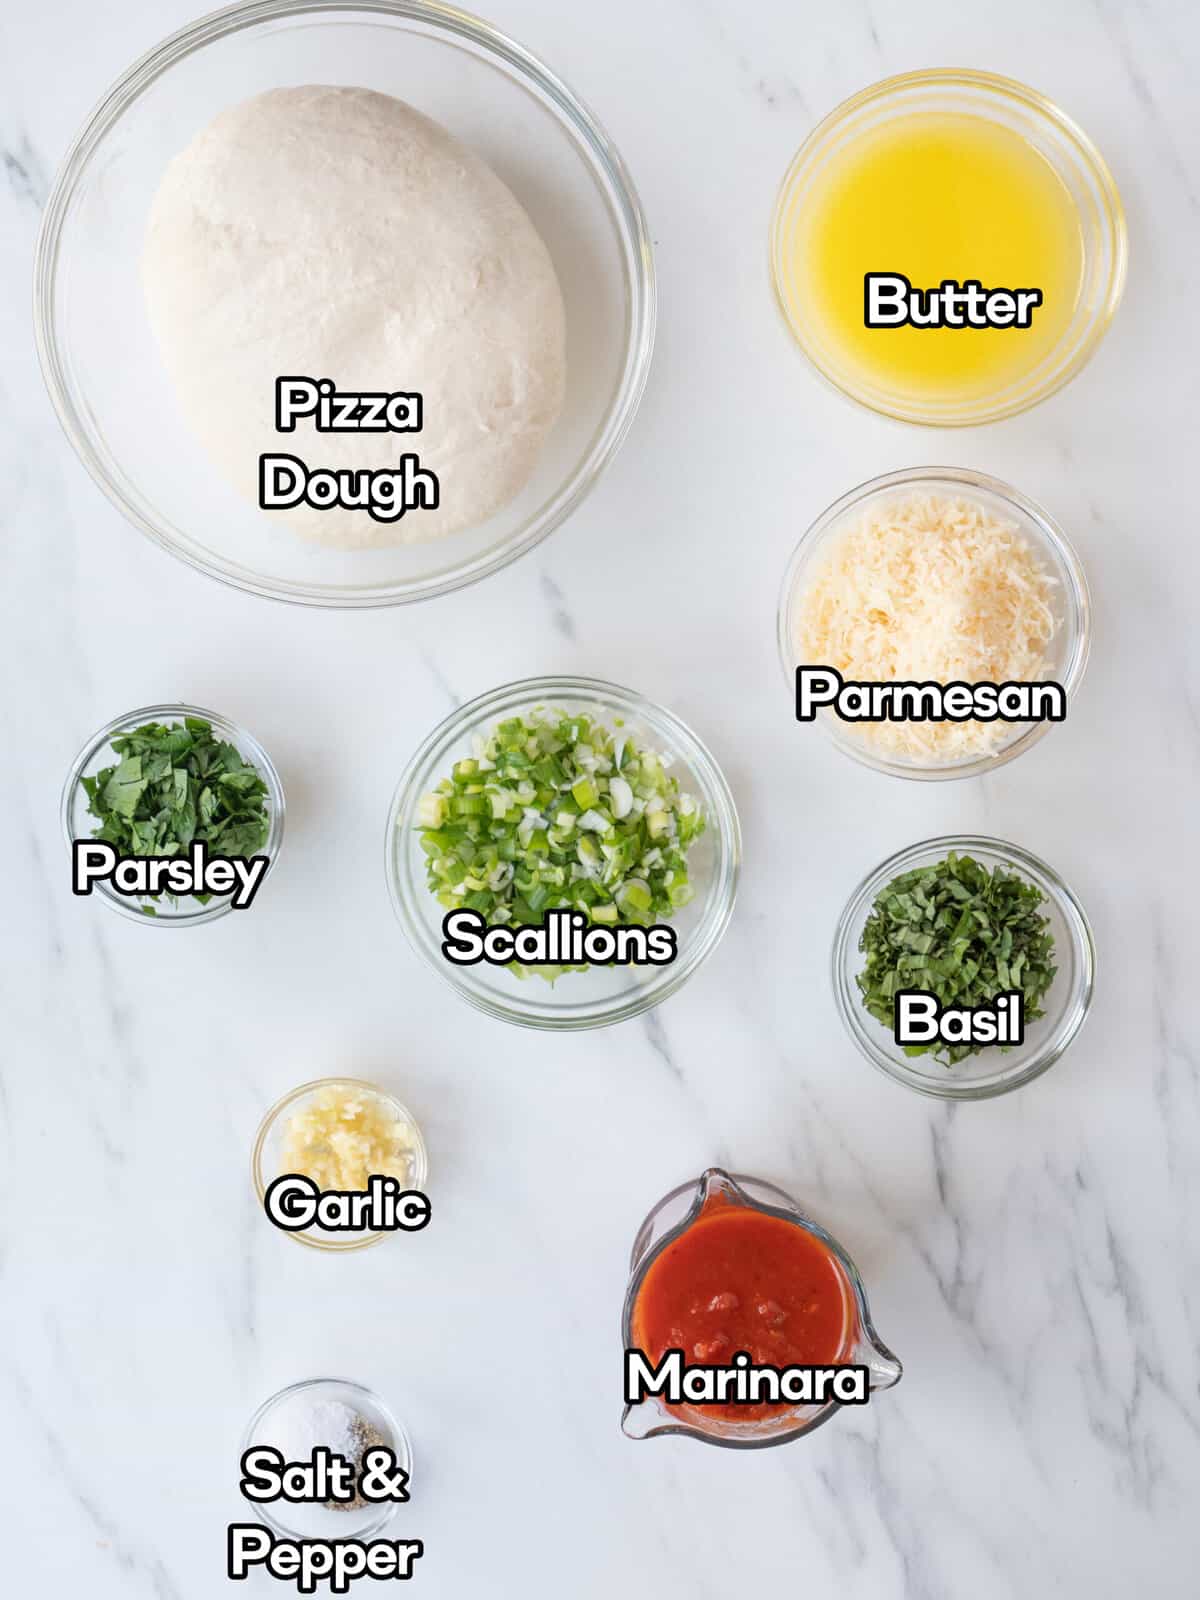 Ingredient shot of individual ingredients in clear bowls including pizza dough, butter, parmesan, basil, scallions, parsley, garlic, marinara, and salt and pepper on a white marbled countertop.